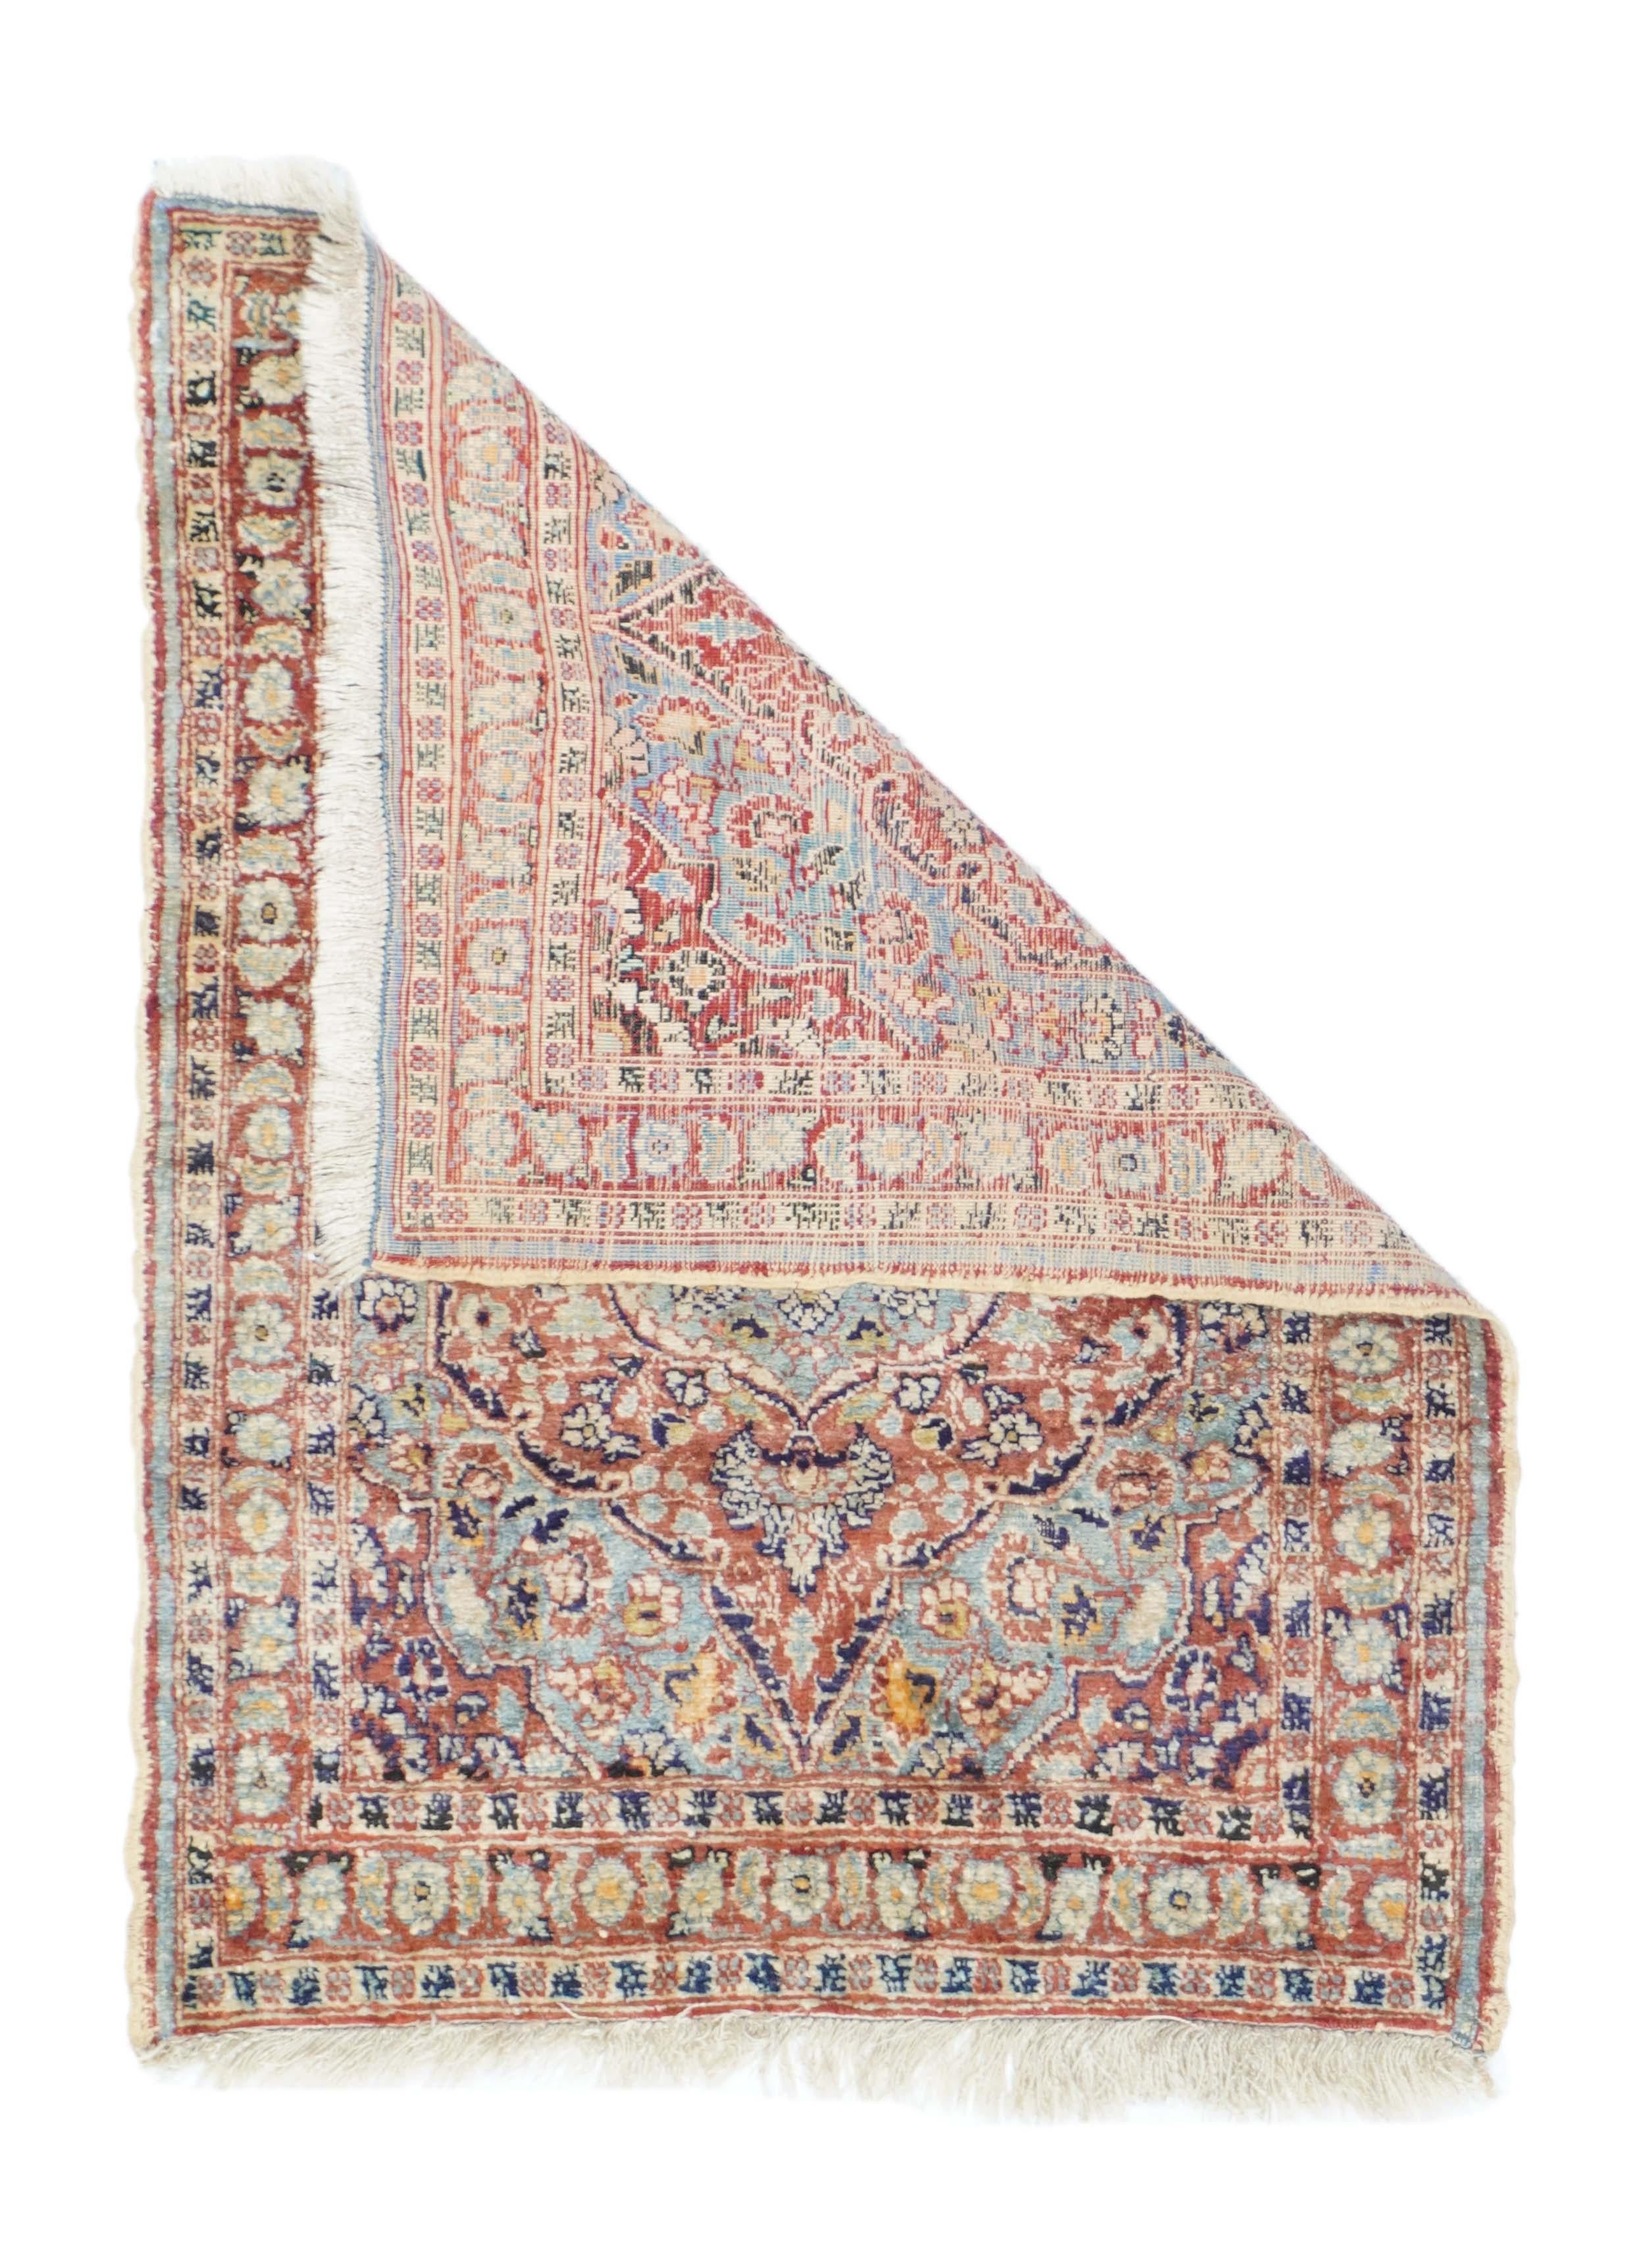 Antique Haji Jalili Rug. This antique ruglet is filled with design on its 